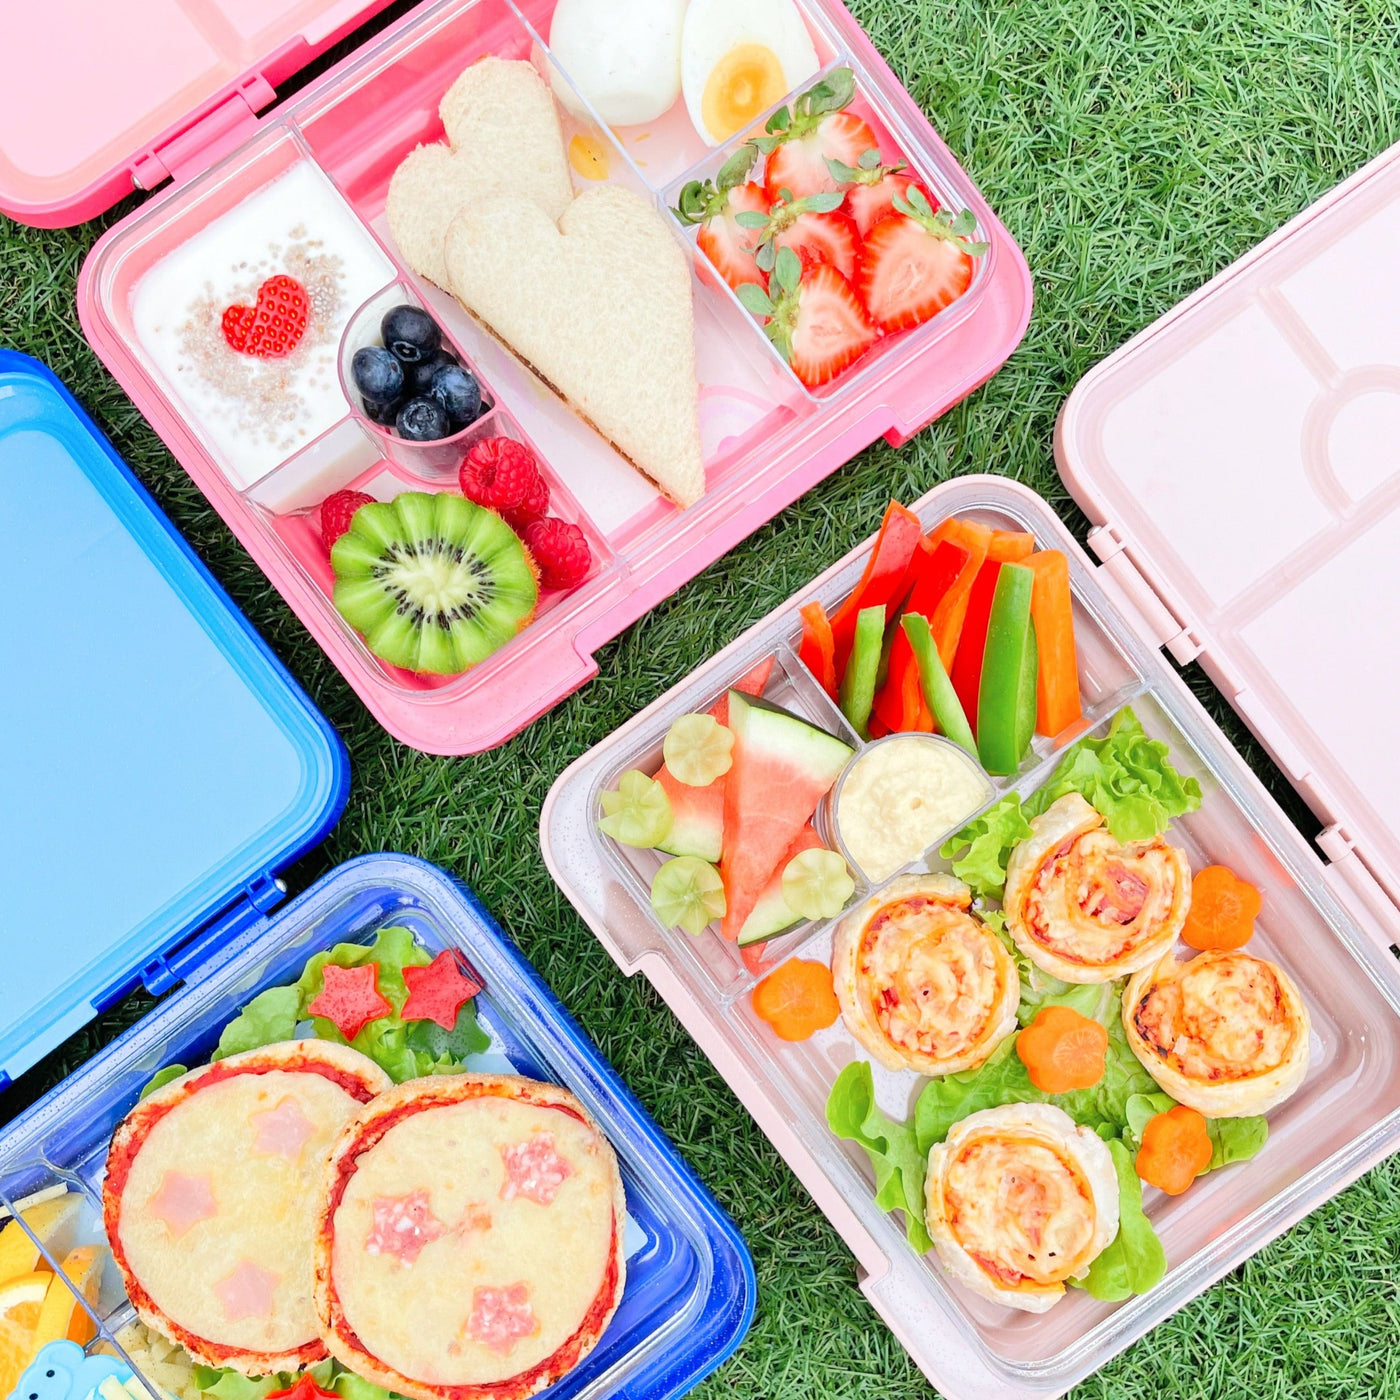 Bento Lunchboxes66